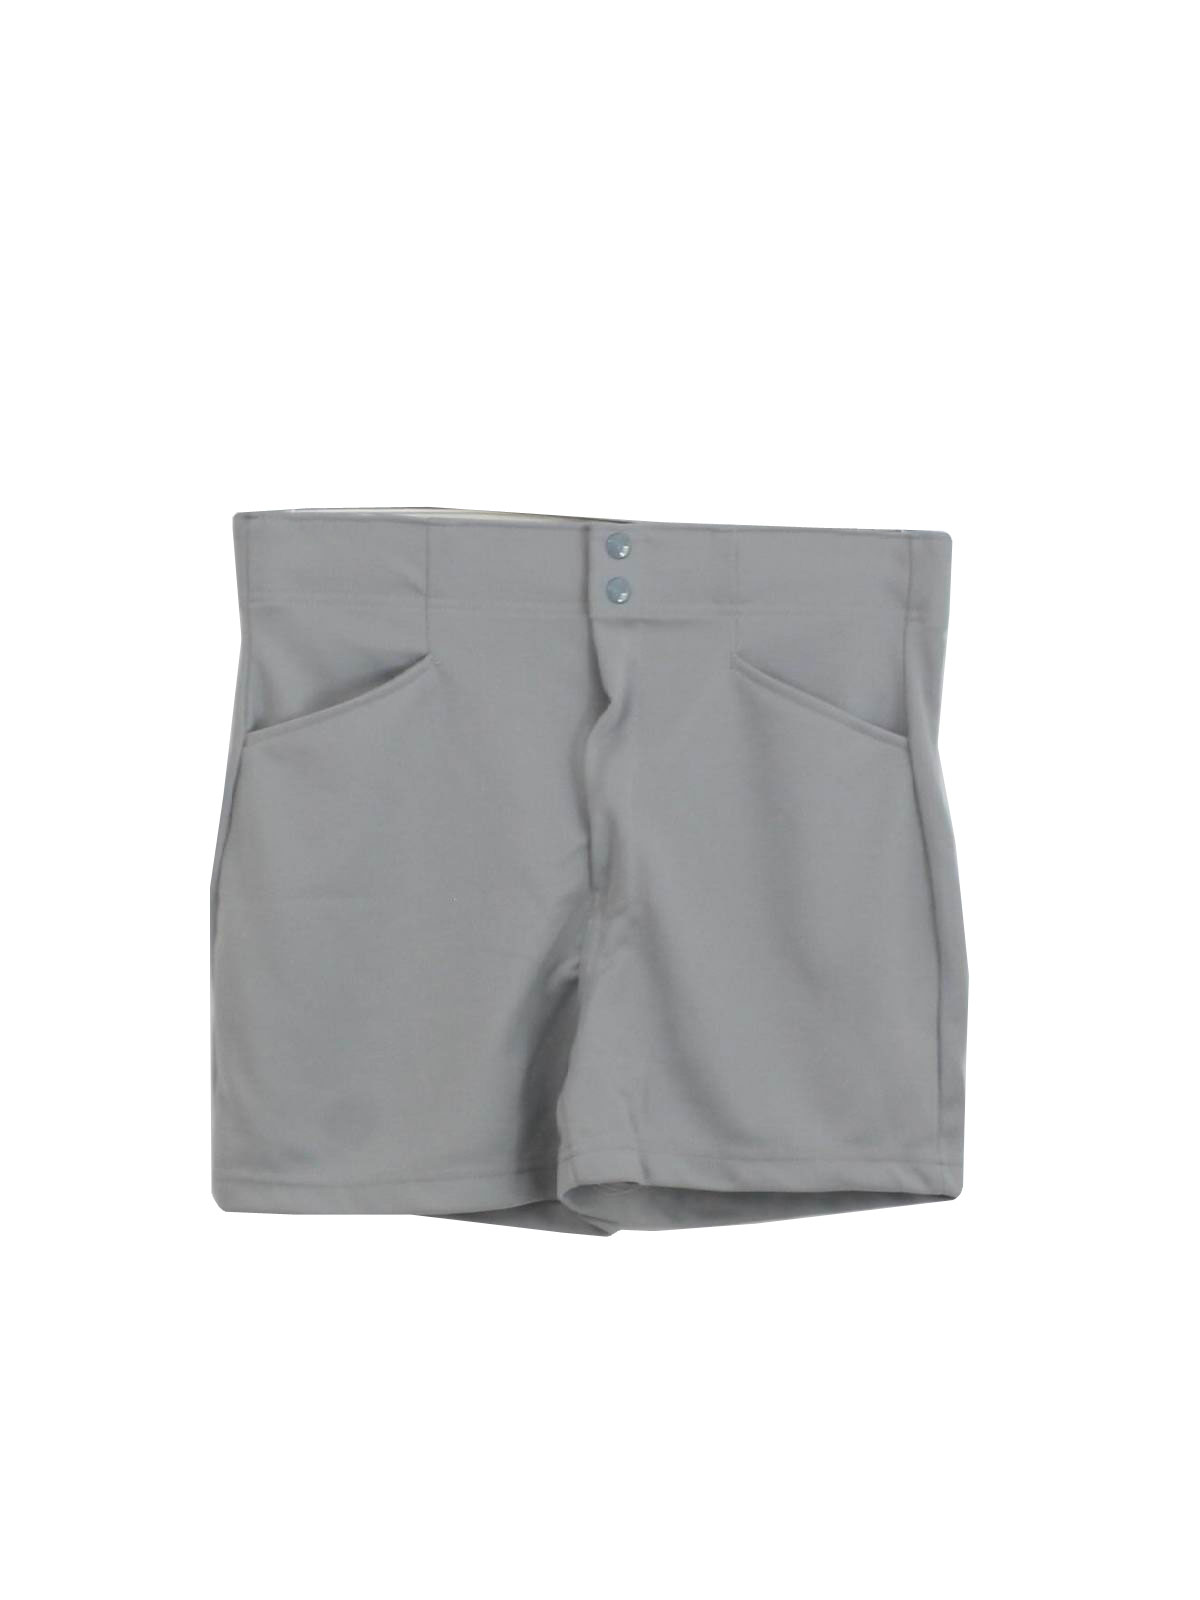 80s Shorts (Athletic Works): 80s -Athletic Works- Mens dove grey ...